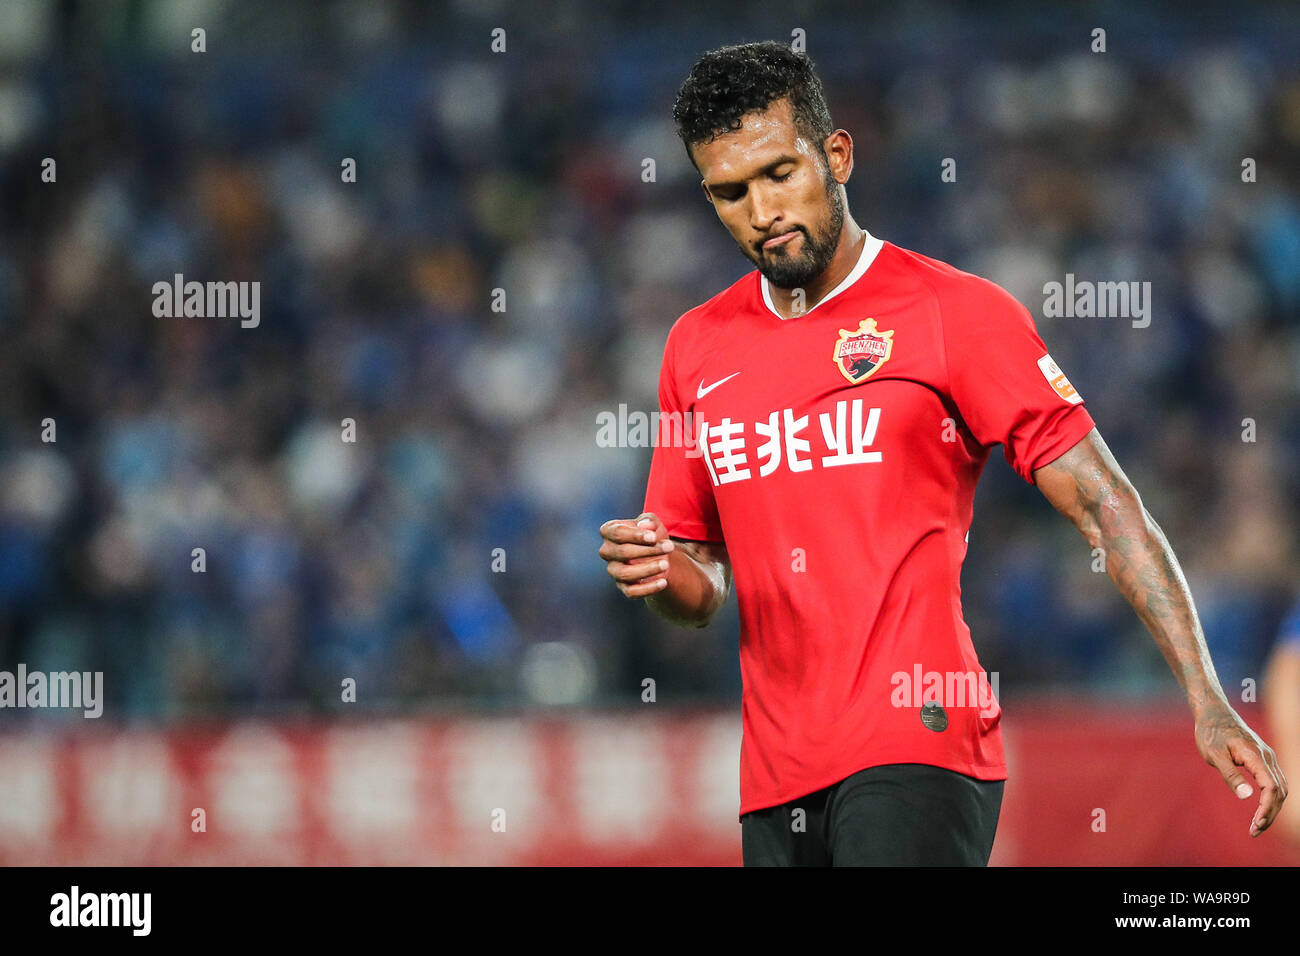 Brazilian-born Portuguese football player Dyego Sousa of Shenzhen FC reacts as he competes against Jiangsu Suning in their 20th round match during the Stock Photo